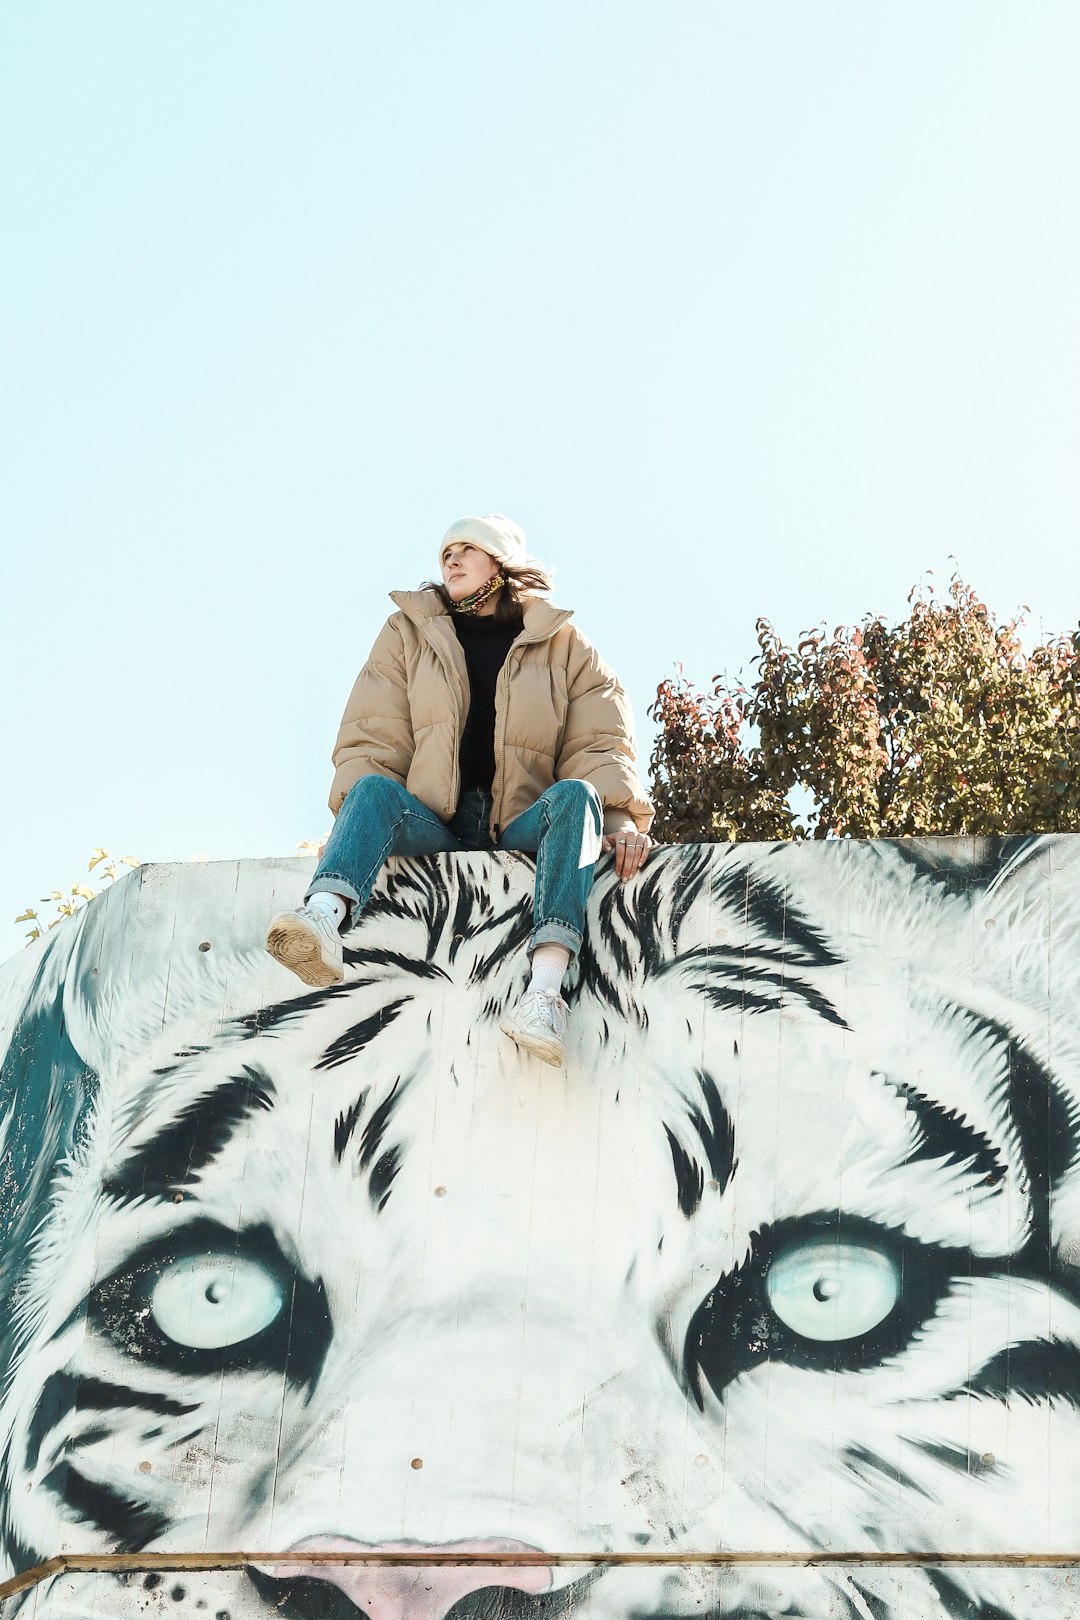 man in brown jacket and blue denim jeans riding on white and black zebra during daytime